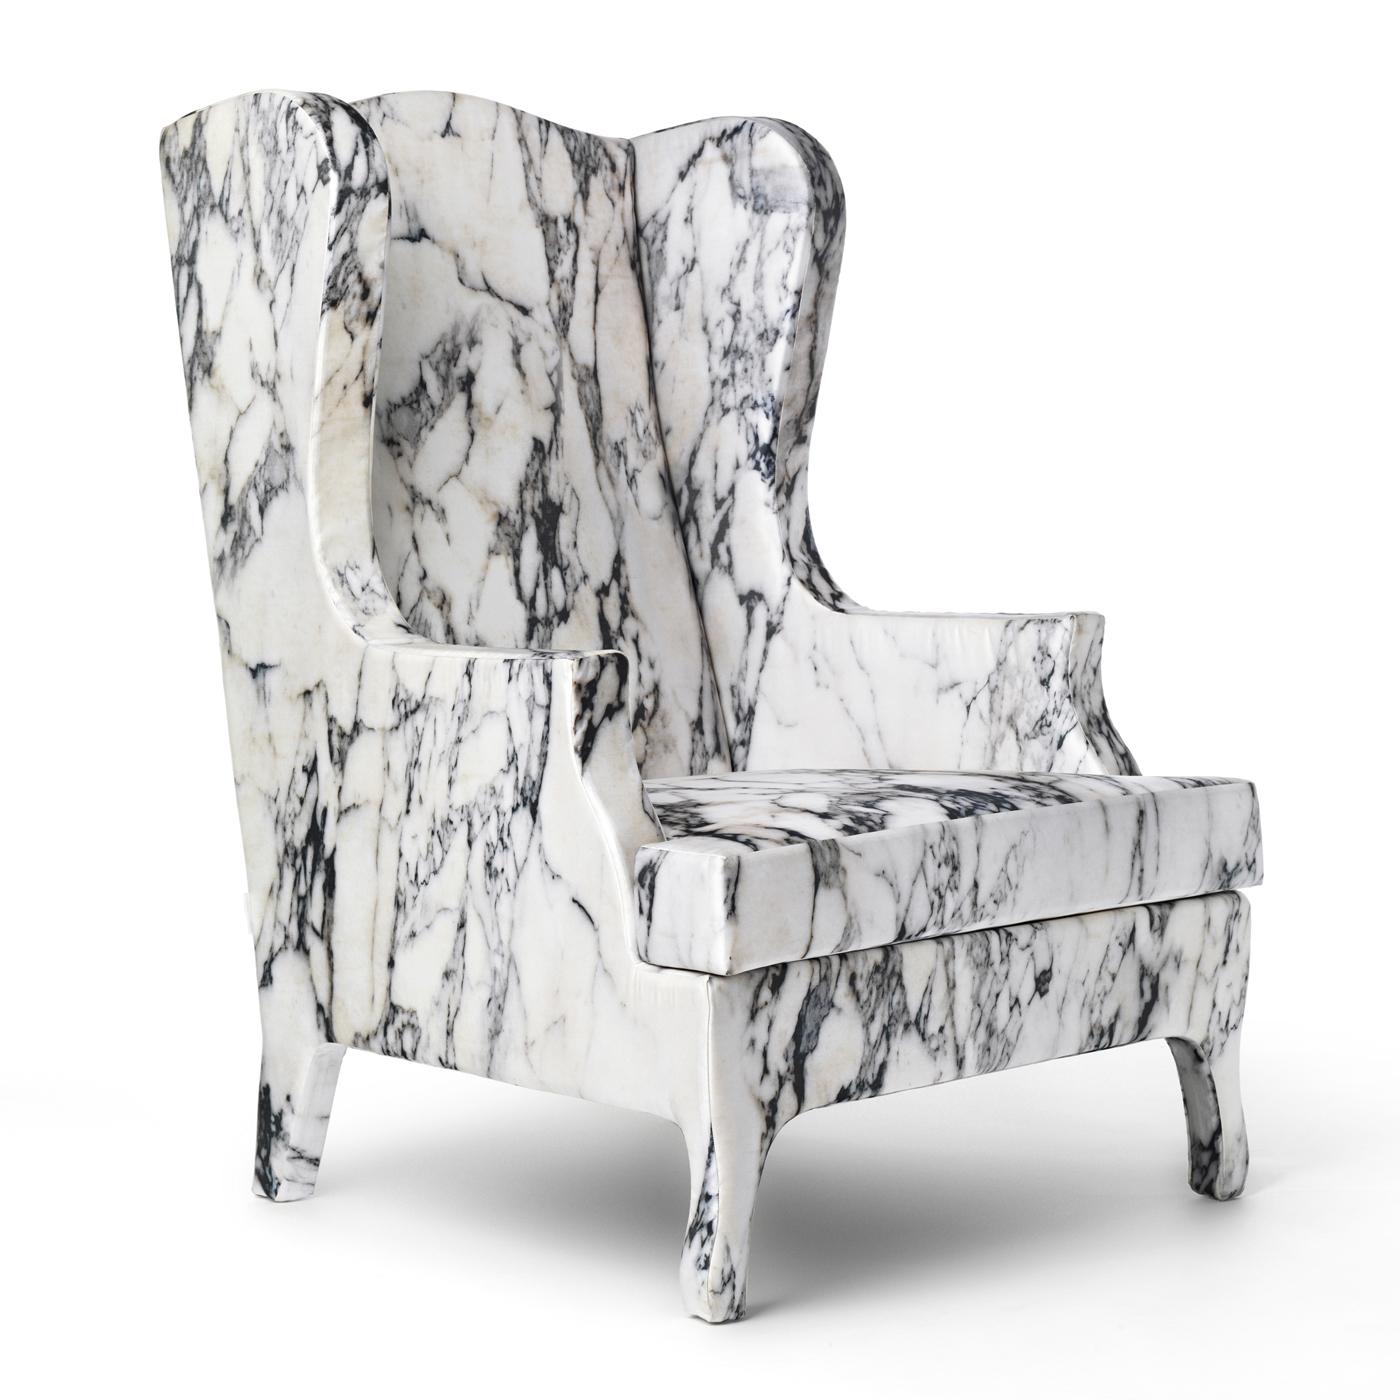 Classic meets modern in this stunning armchair designed by Maurizio Galante and Tal Lancman of the Louis XV Goes To Sparta Collection that combines the sinuous shape of the wingback armchair with an ultra-modern material and pattern. The plywood